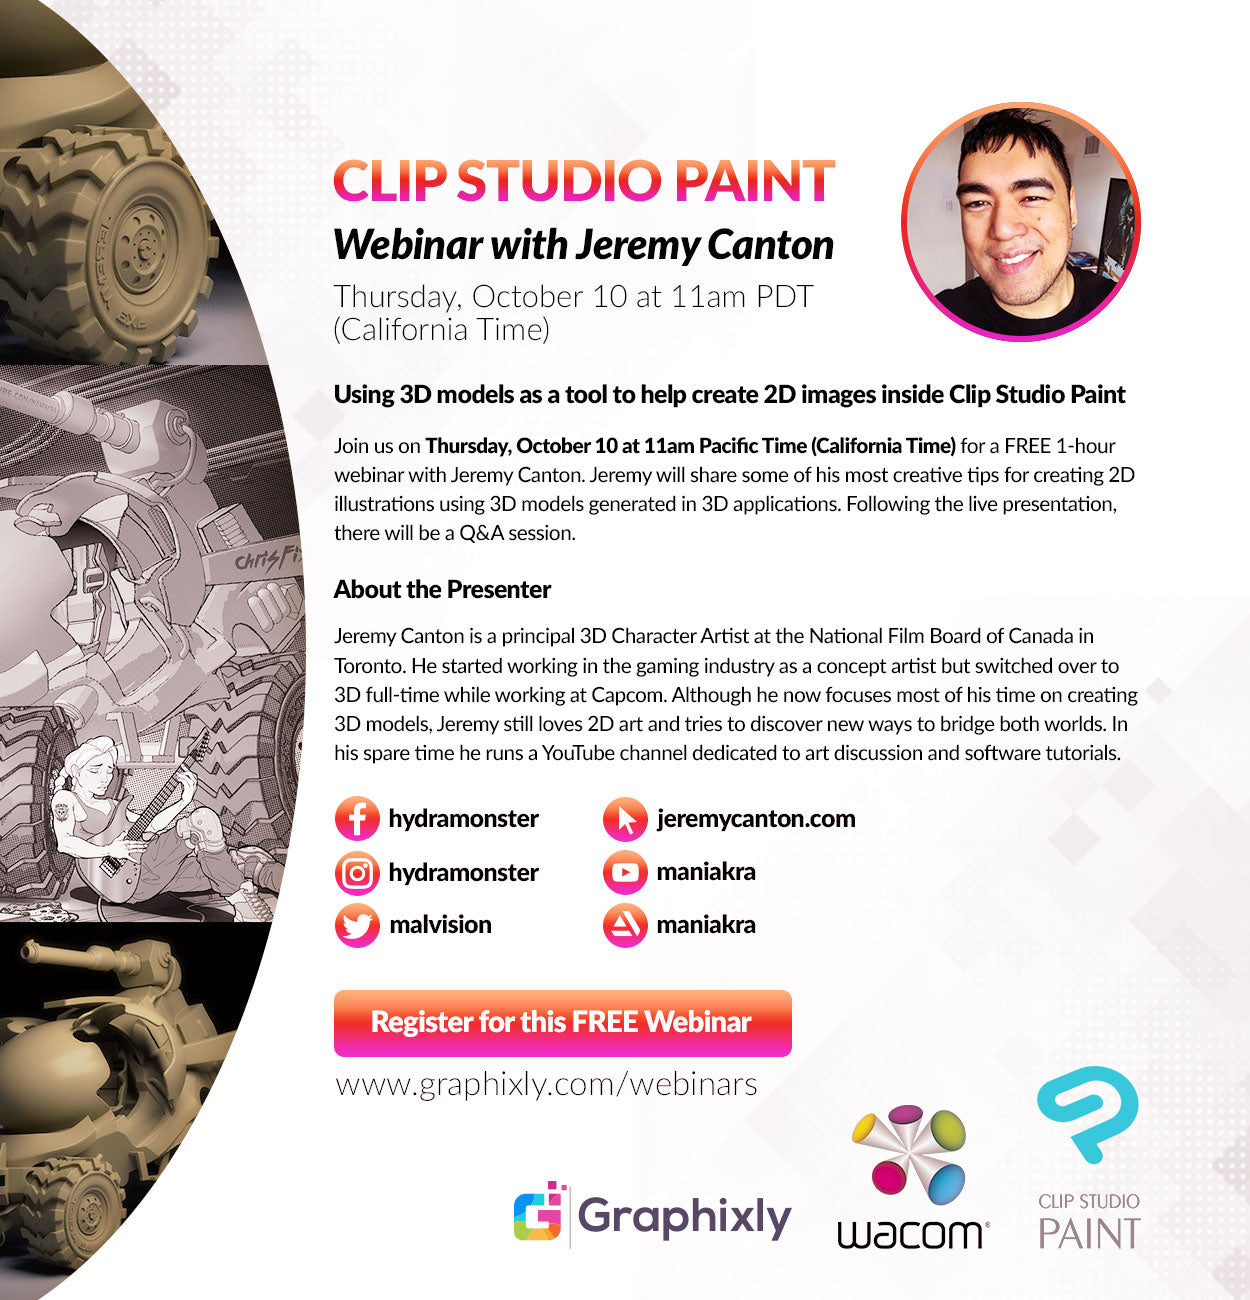 Webinar - Using 3D models as a tool to help create 2D images inside CLIP STUDIO PAINT